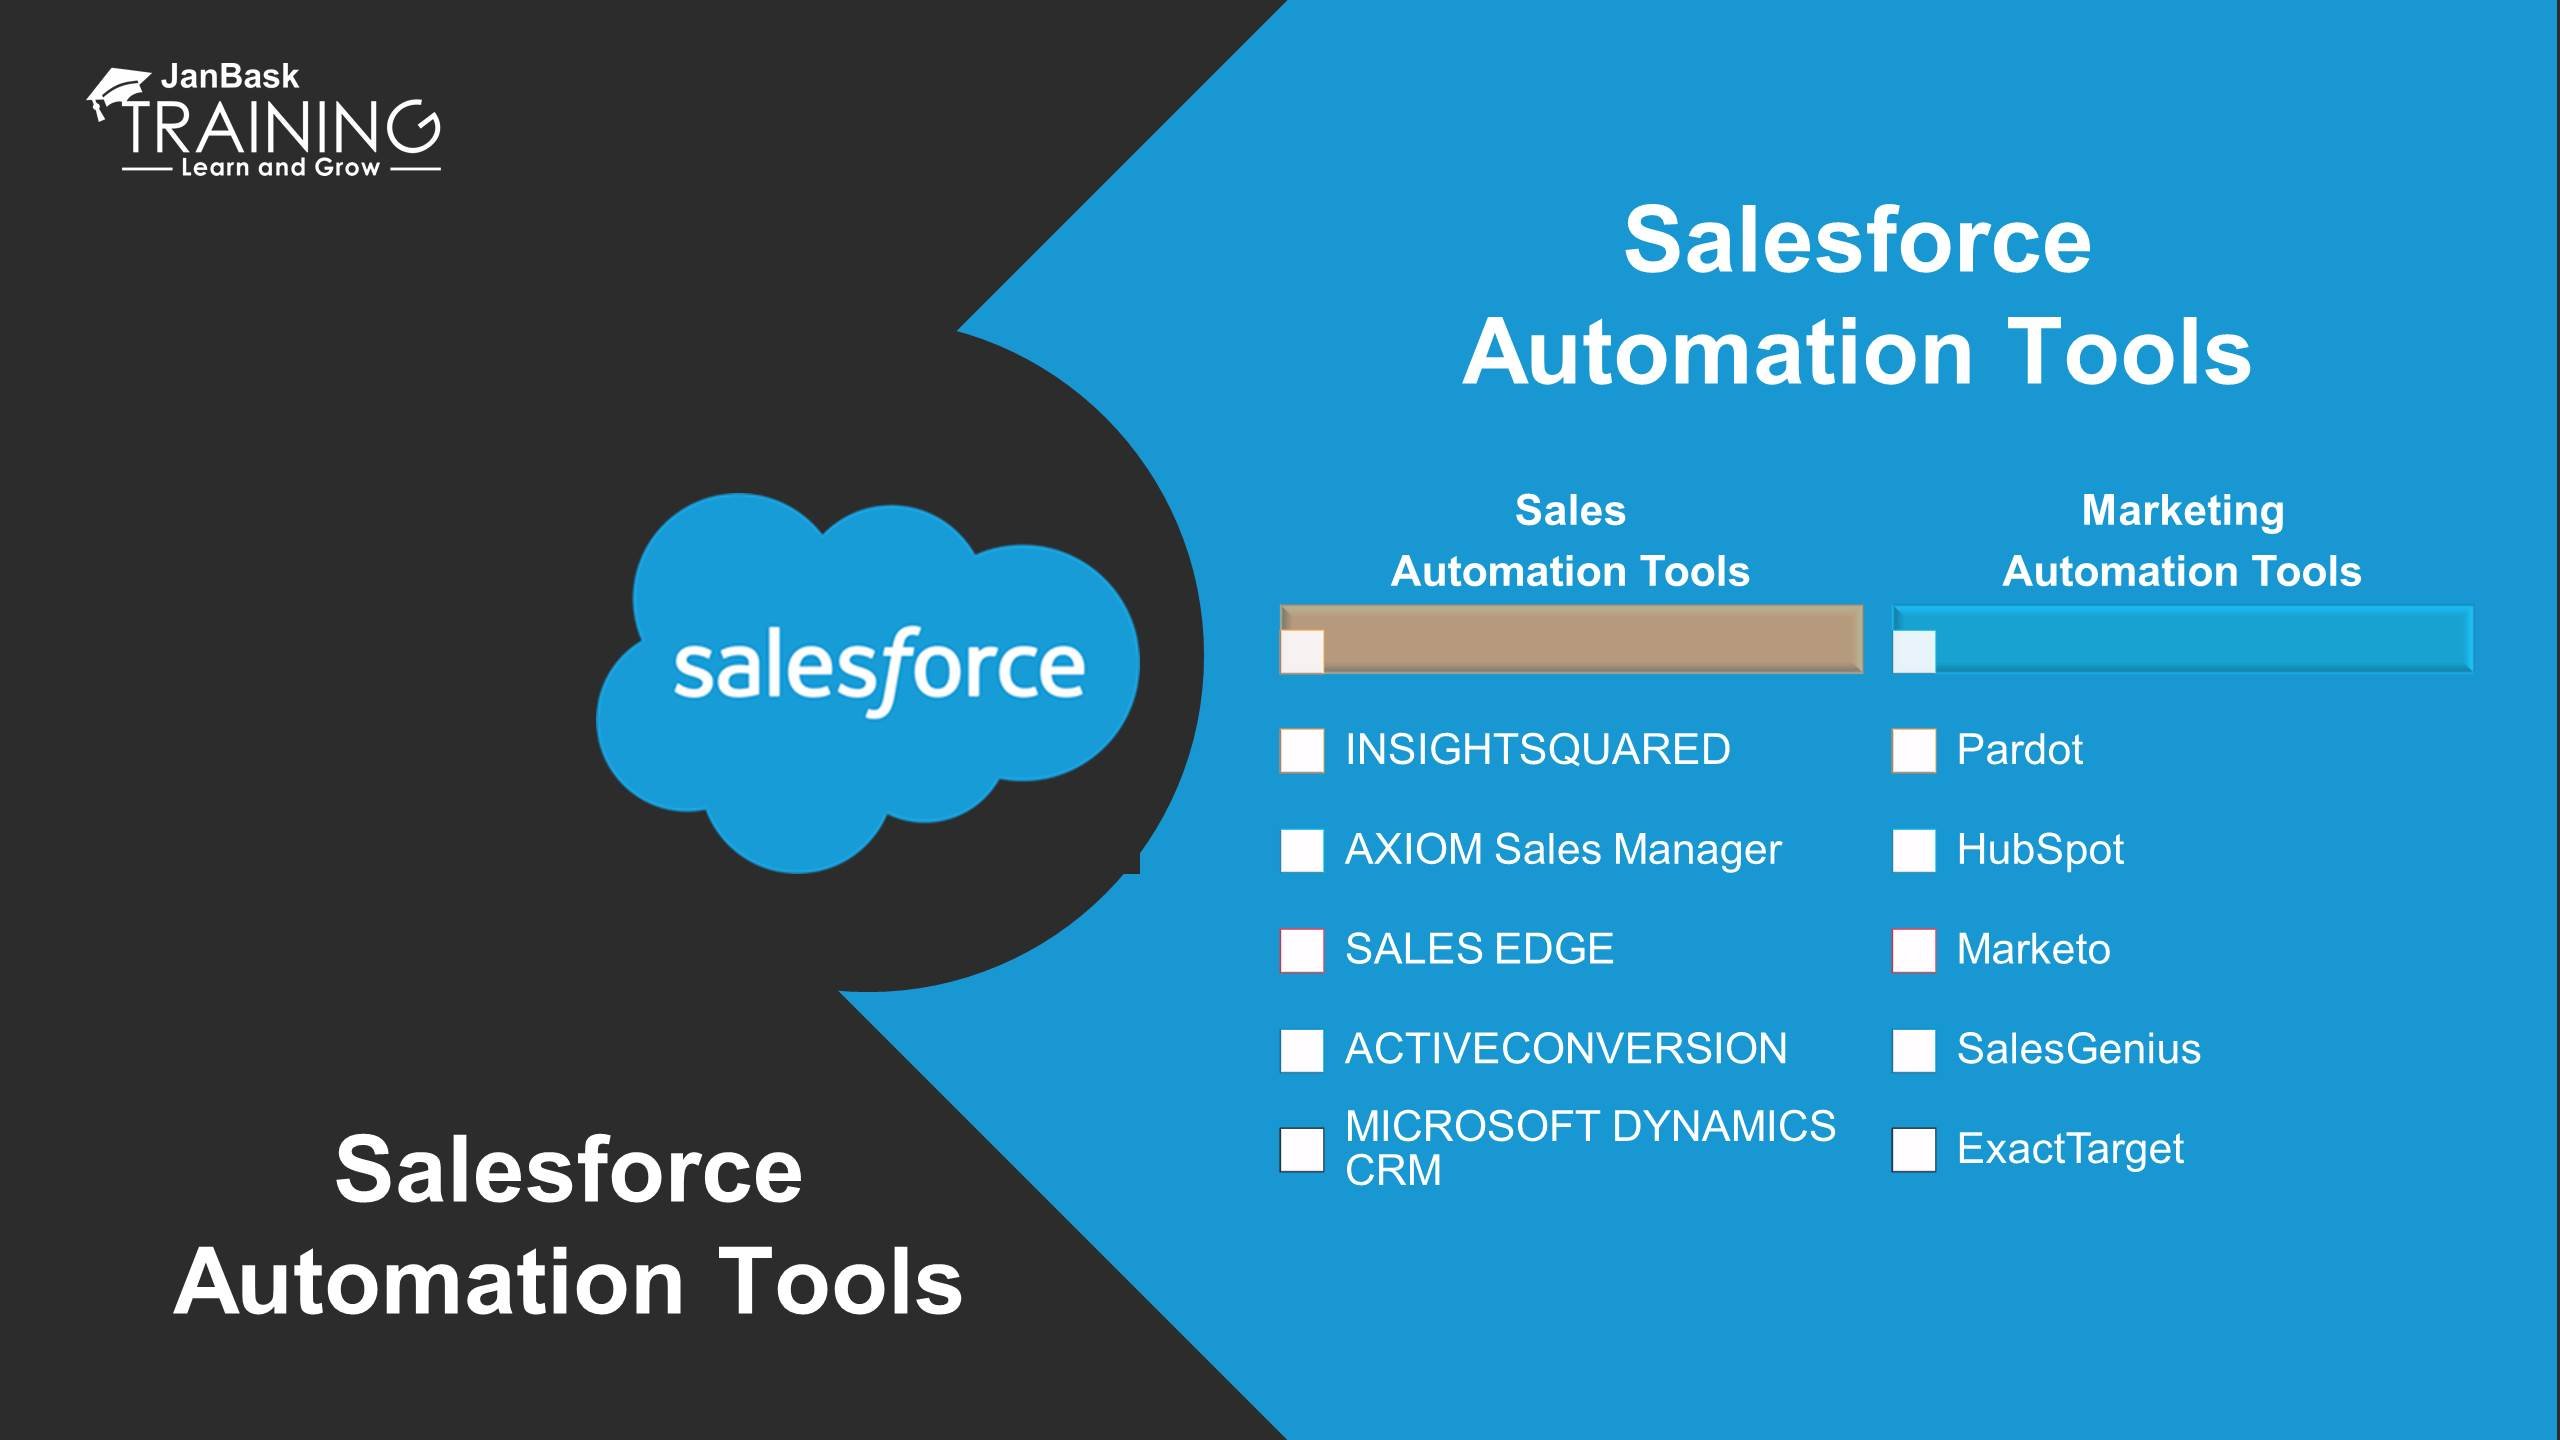 Top 10 Salesforce Automation Tools Which Do You Use